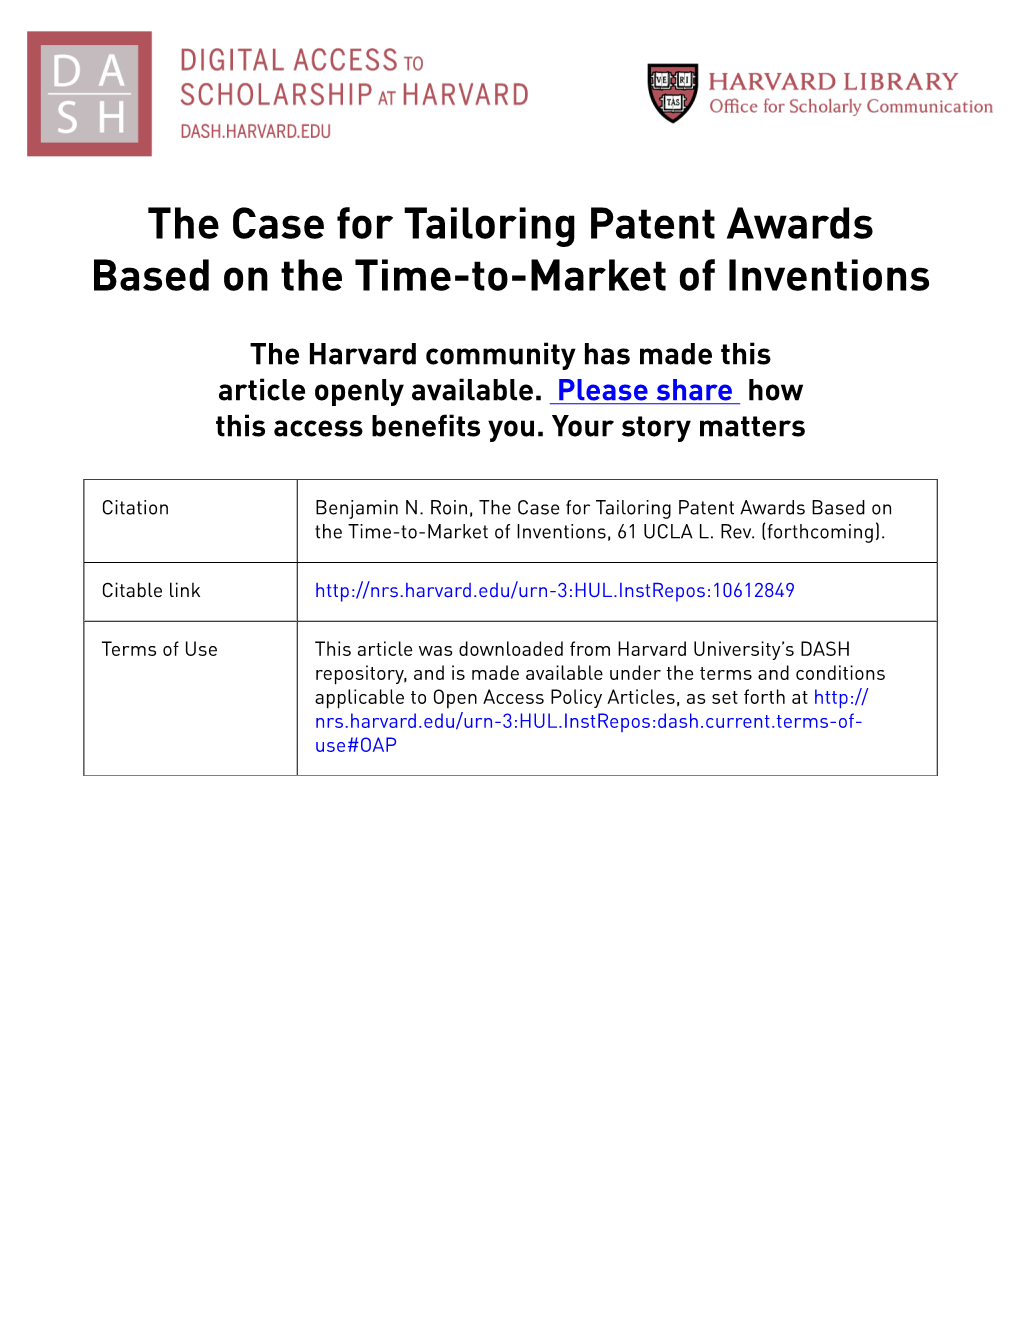 Case for Tailoring Patent Awards 3-15-13